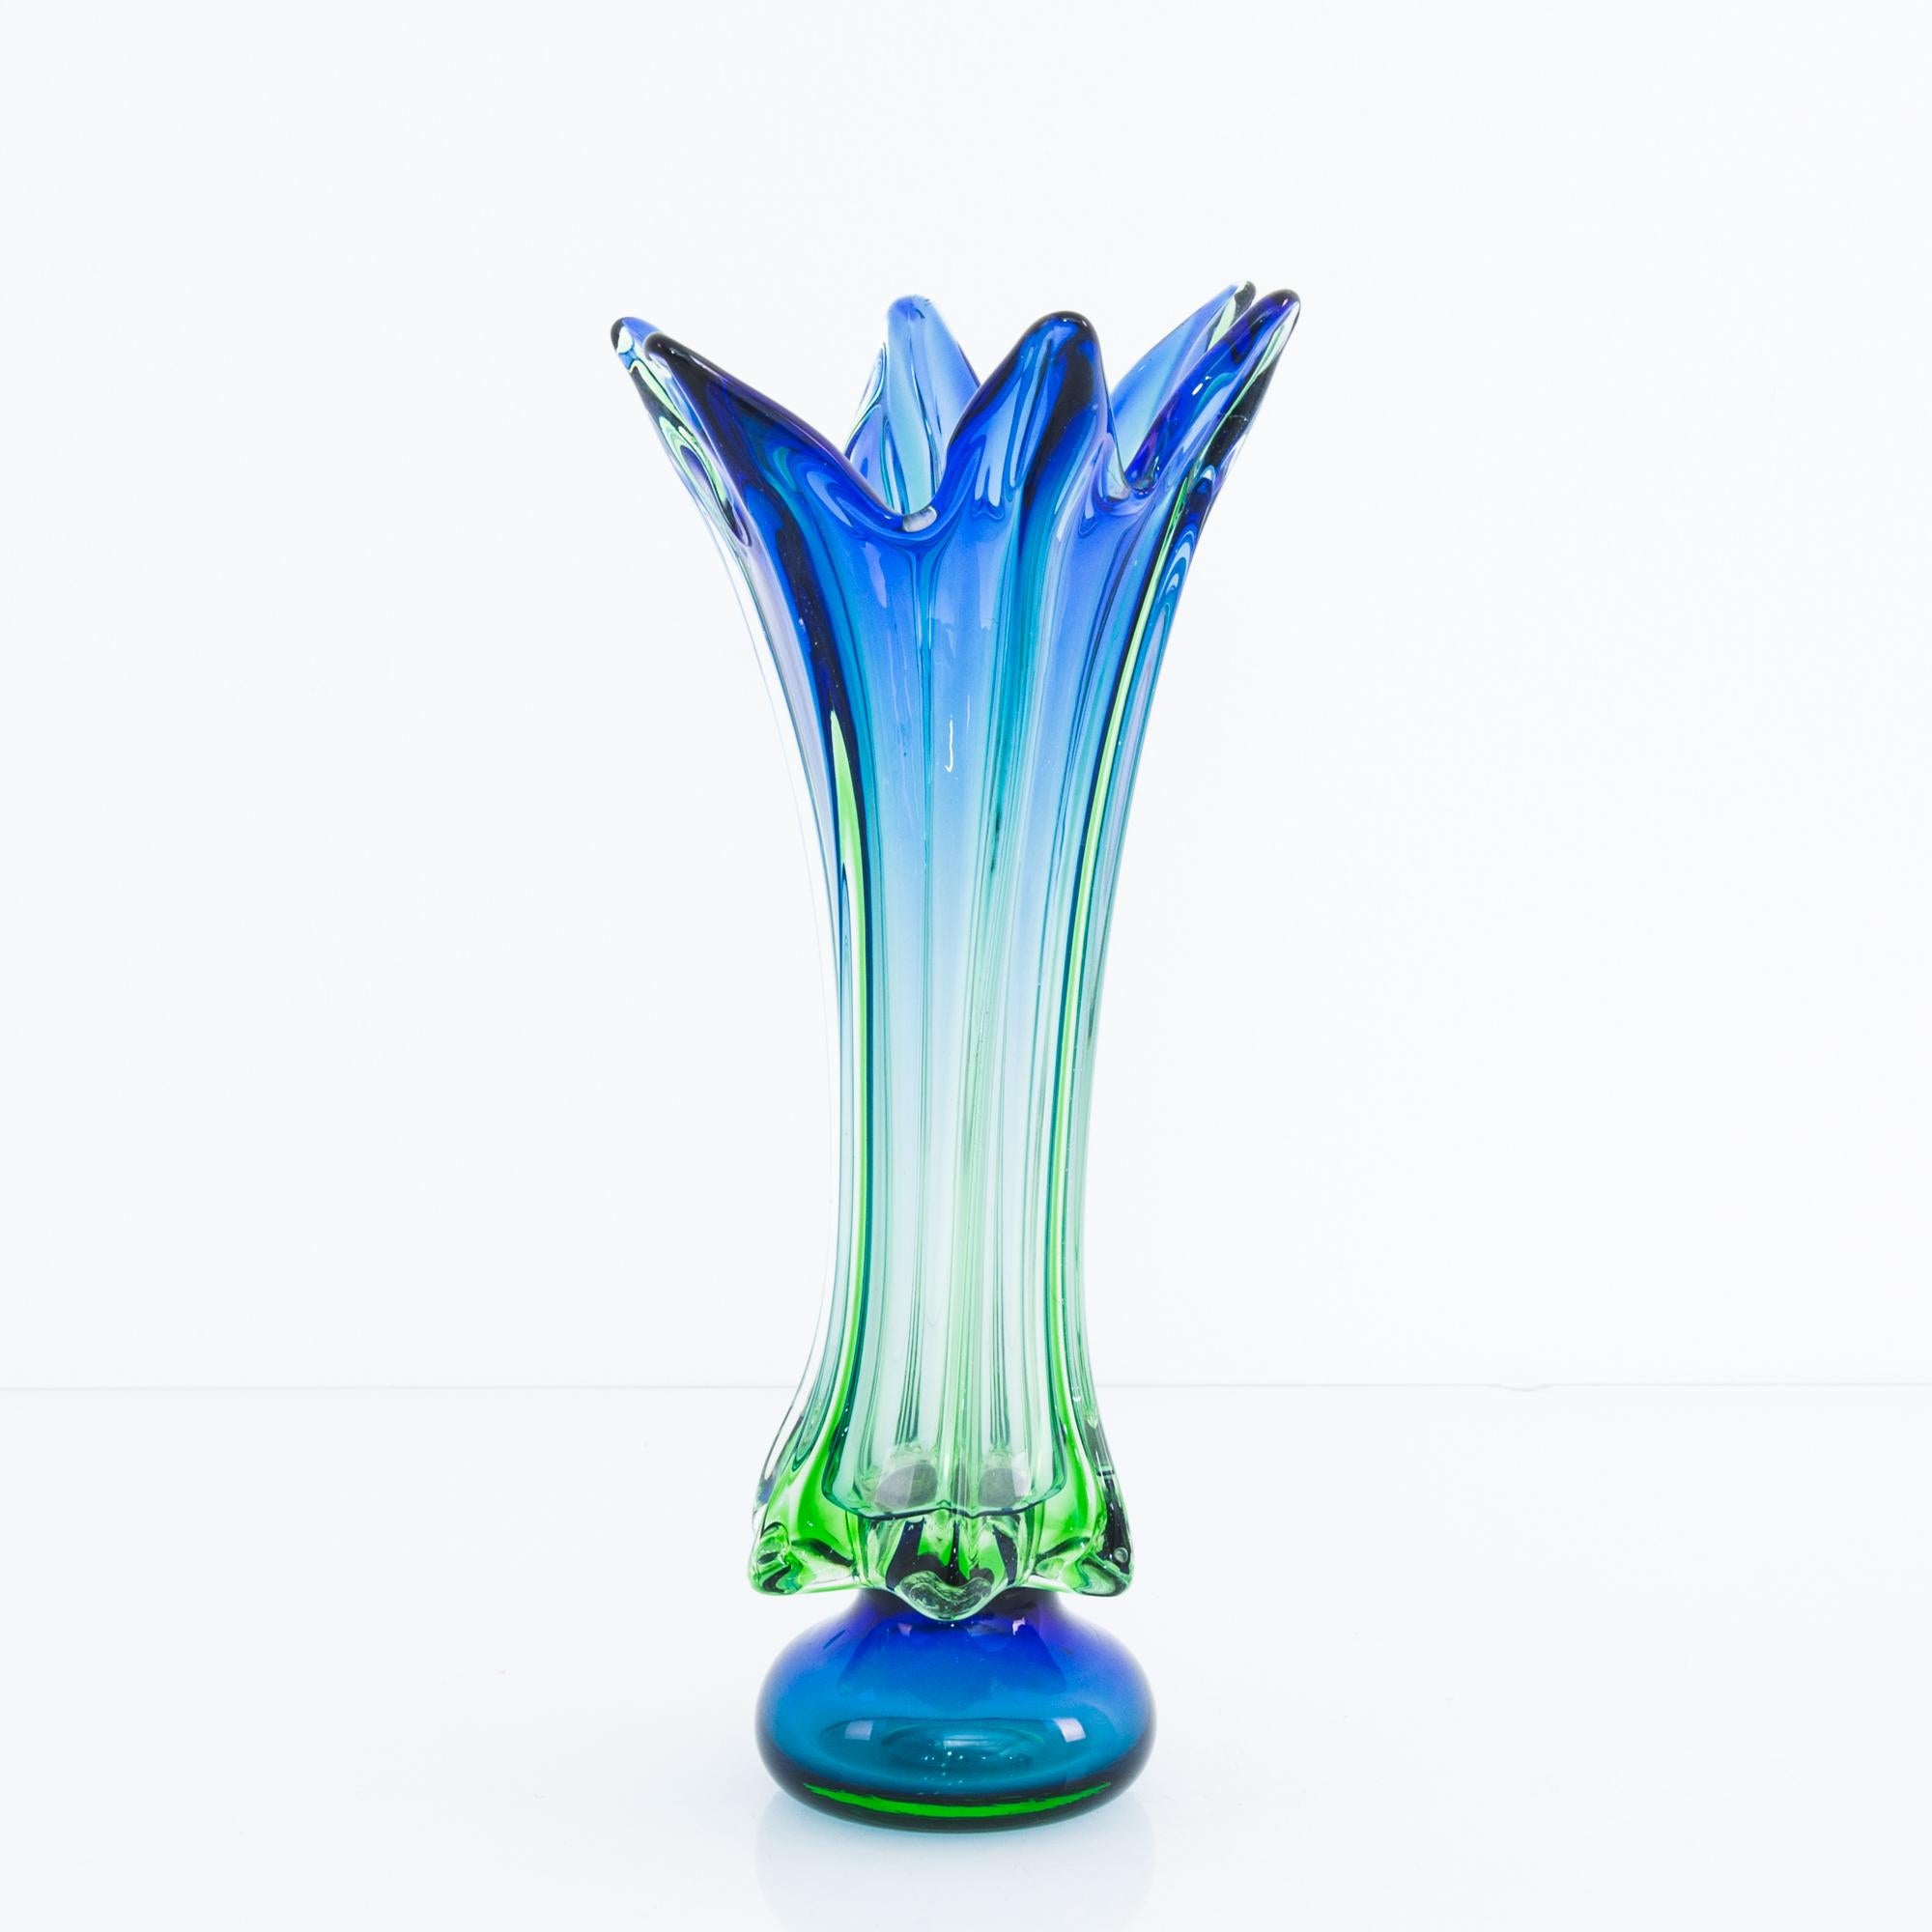 A glass bowl from Belgium, produced circa 1960. An elegant, hand blown decorative glass vase in an evocative blue-green gradient. Like a dancer caught in motion as she moves through maneuvers: arms stretched out wide in second position, while being